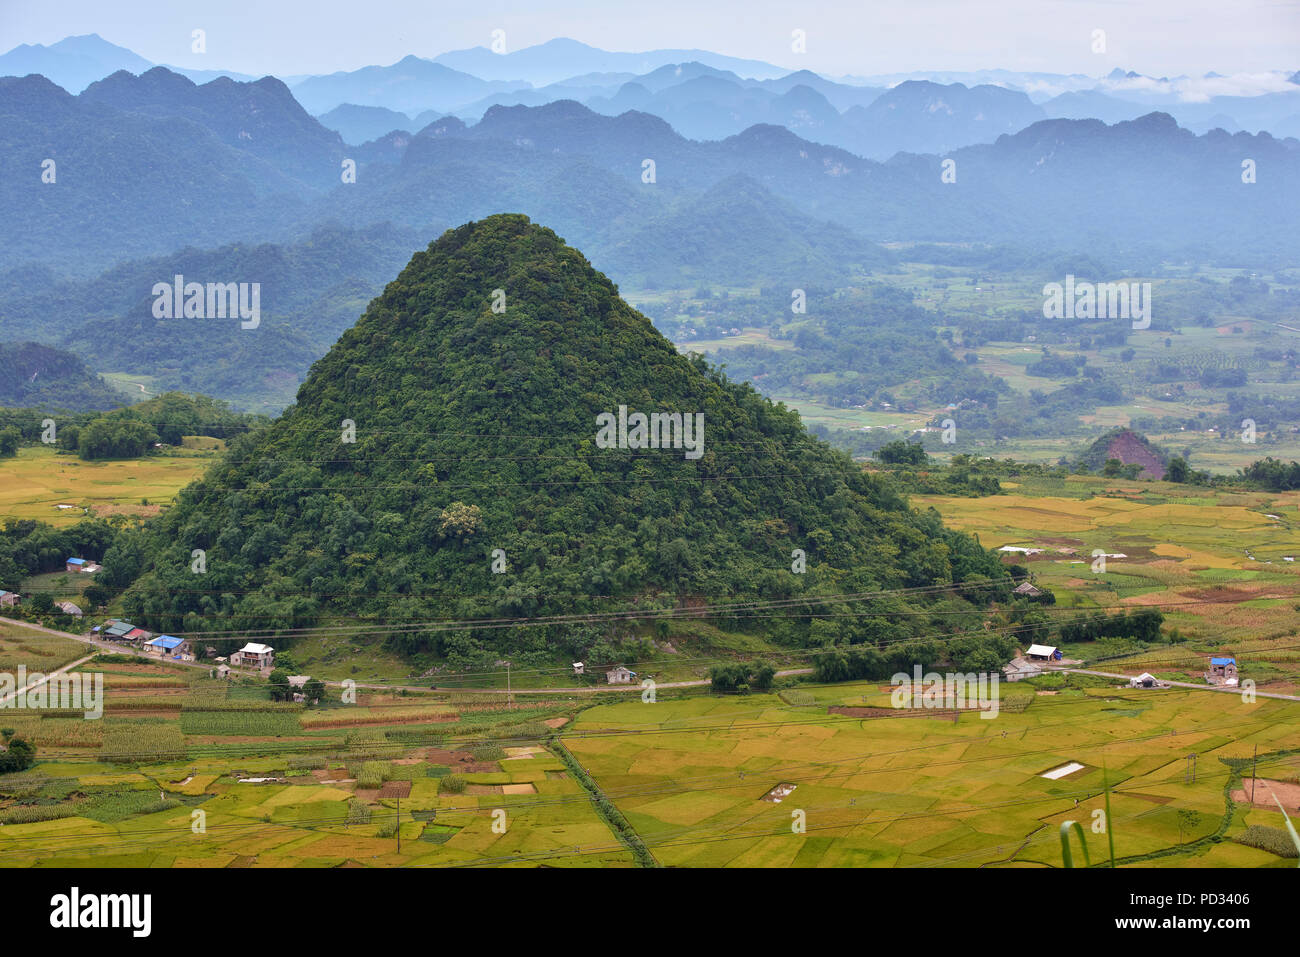 High angle shot of scenary in Hoa Binh region of North Vietnam, featuring montains with low hanging clouds and mist in the distance. Stock Photo